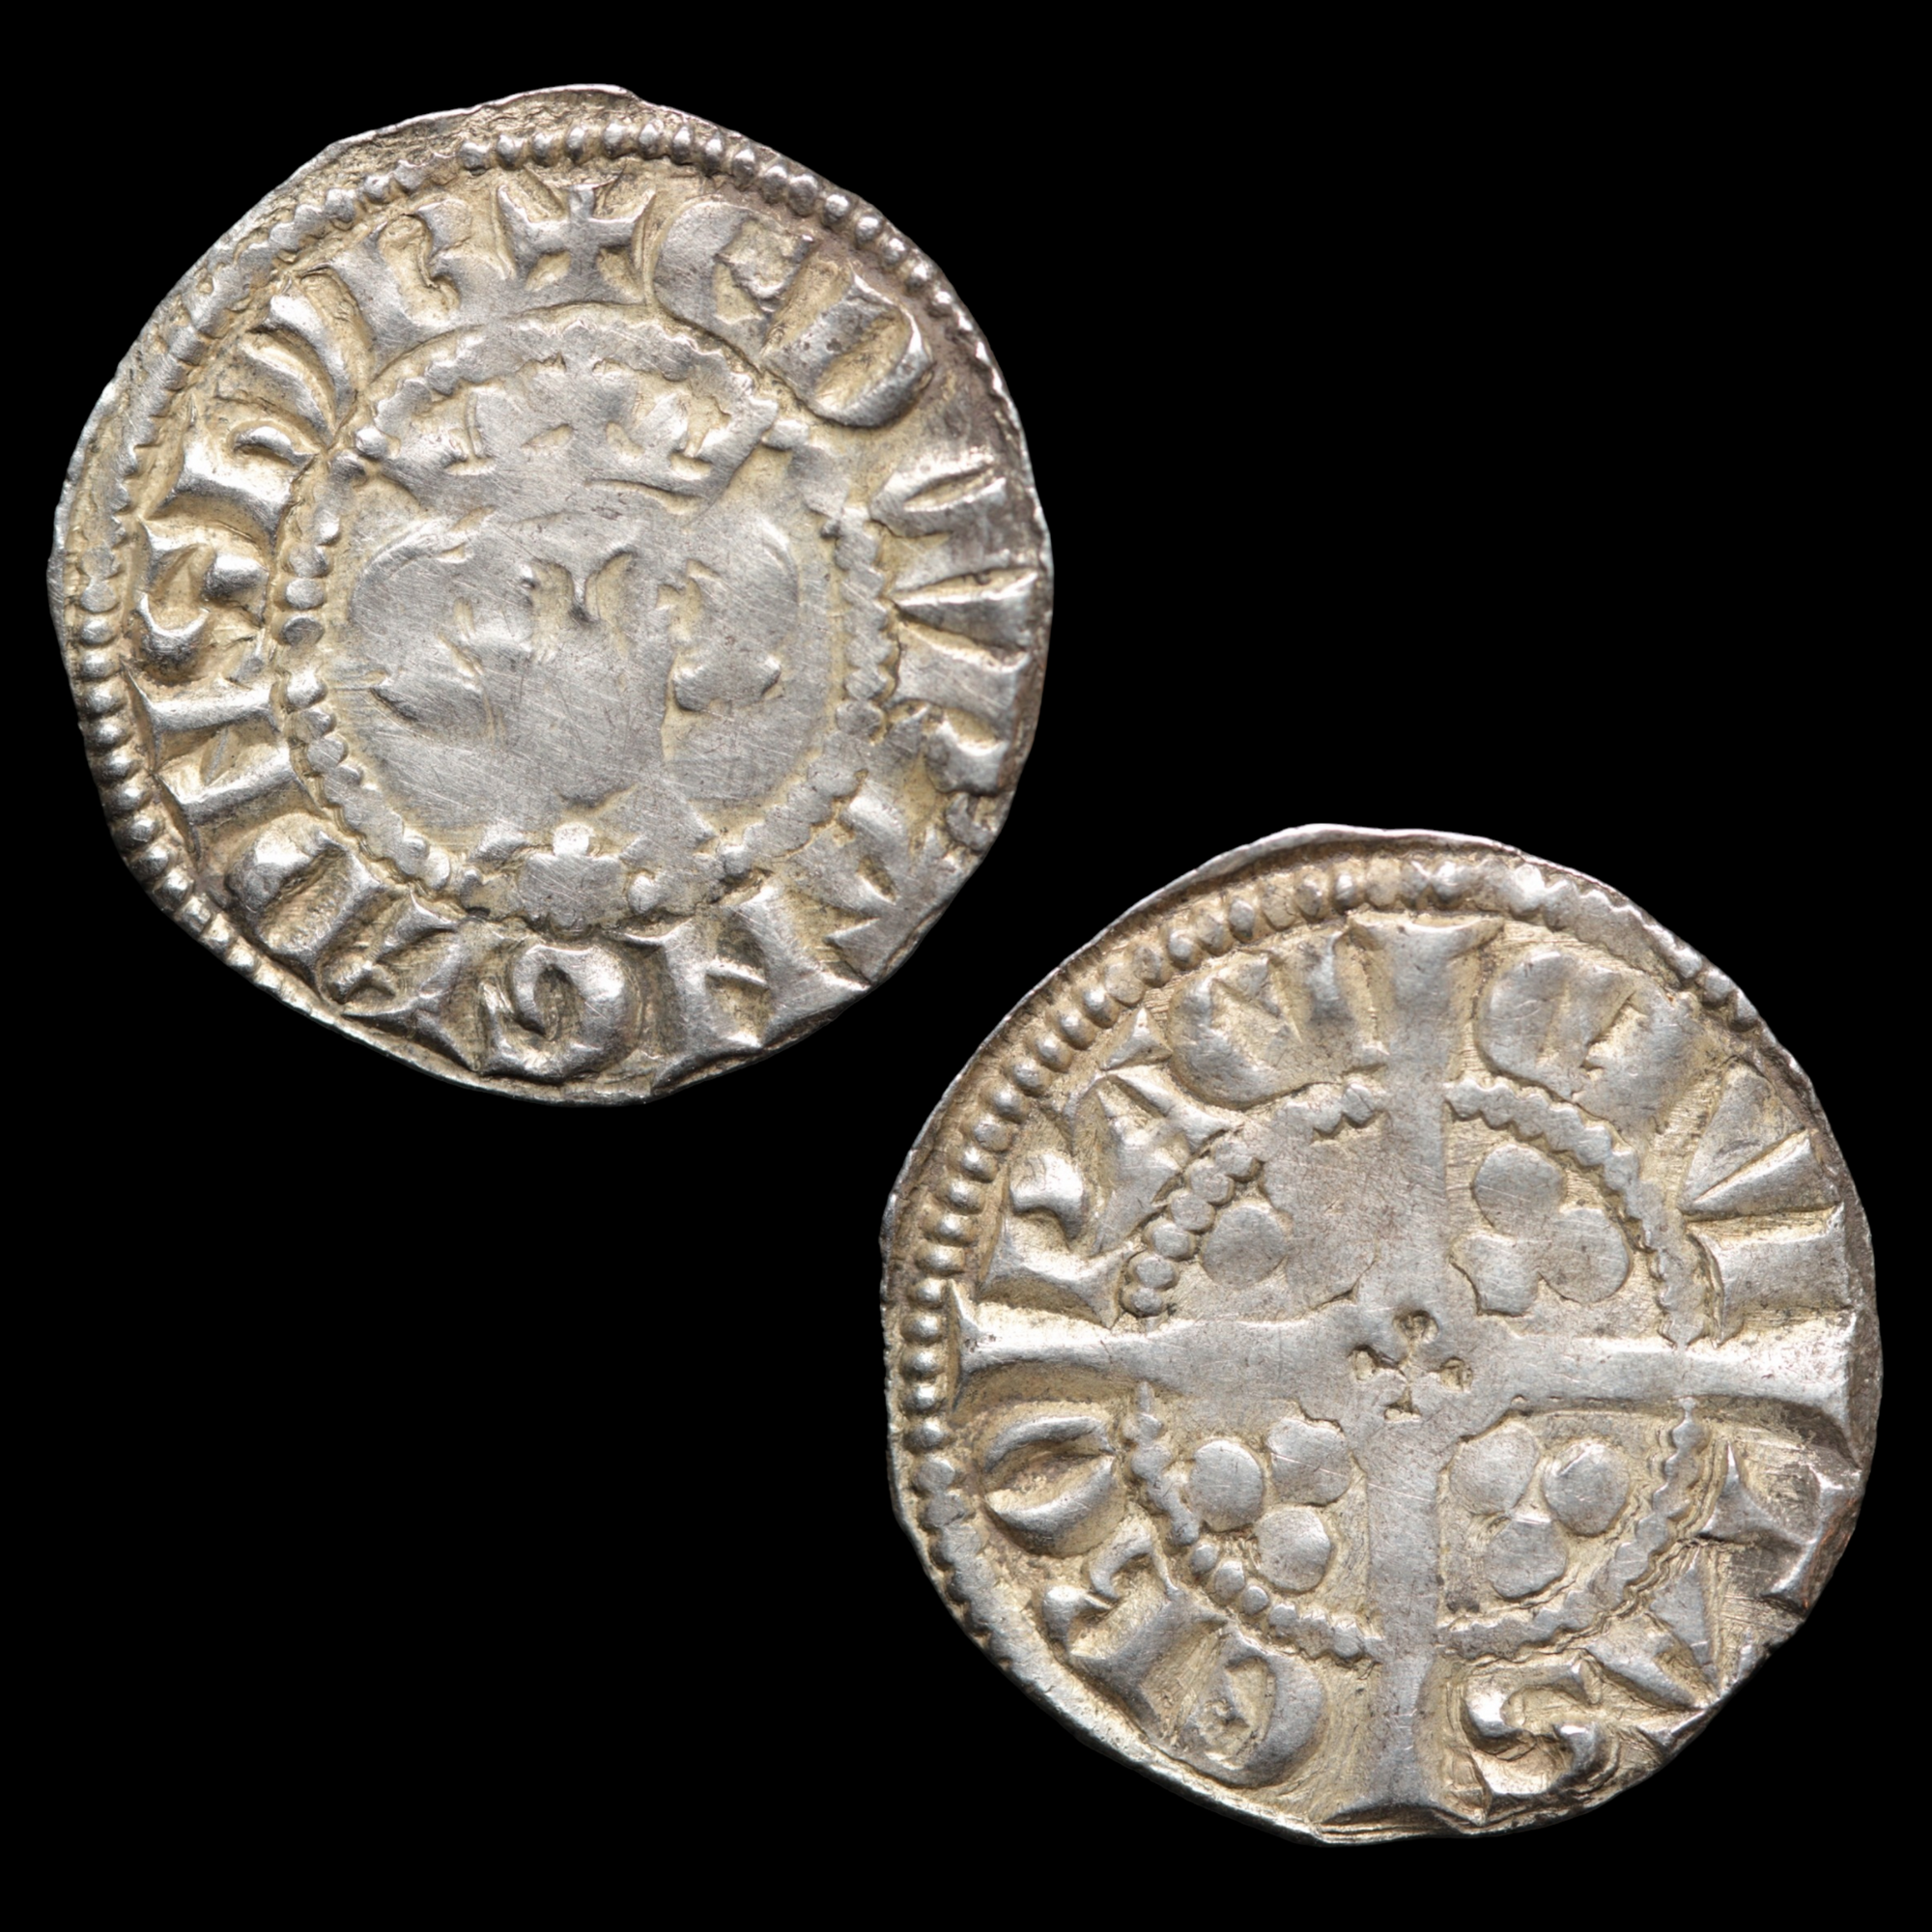 England, King Edward I, Silver Penny - 1272 to 1307 CE - Discovered in S. Norfolk - 10/19/23 Auction